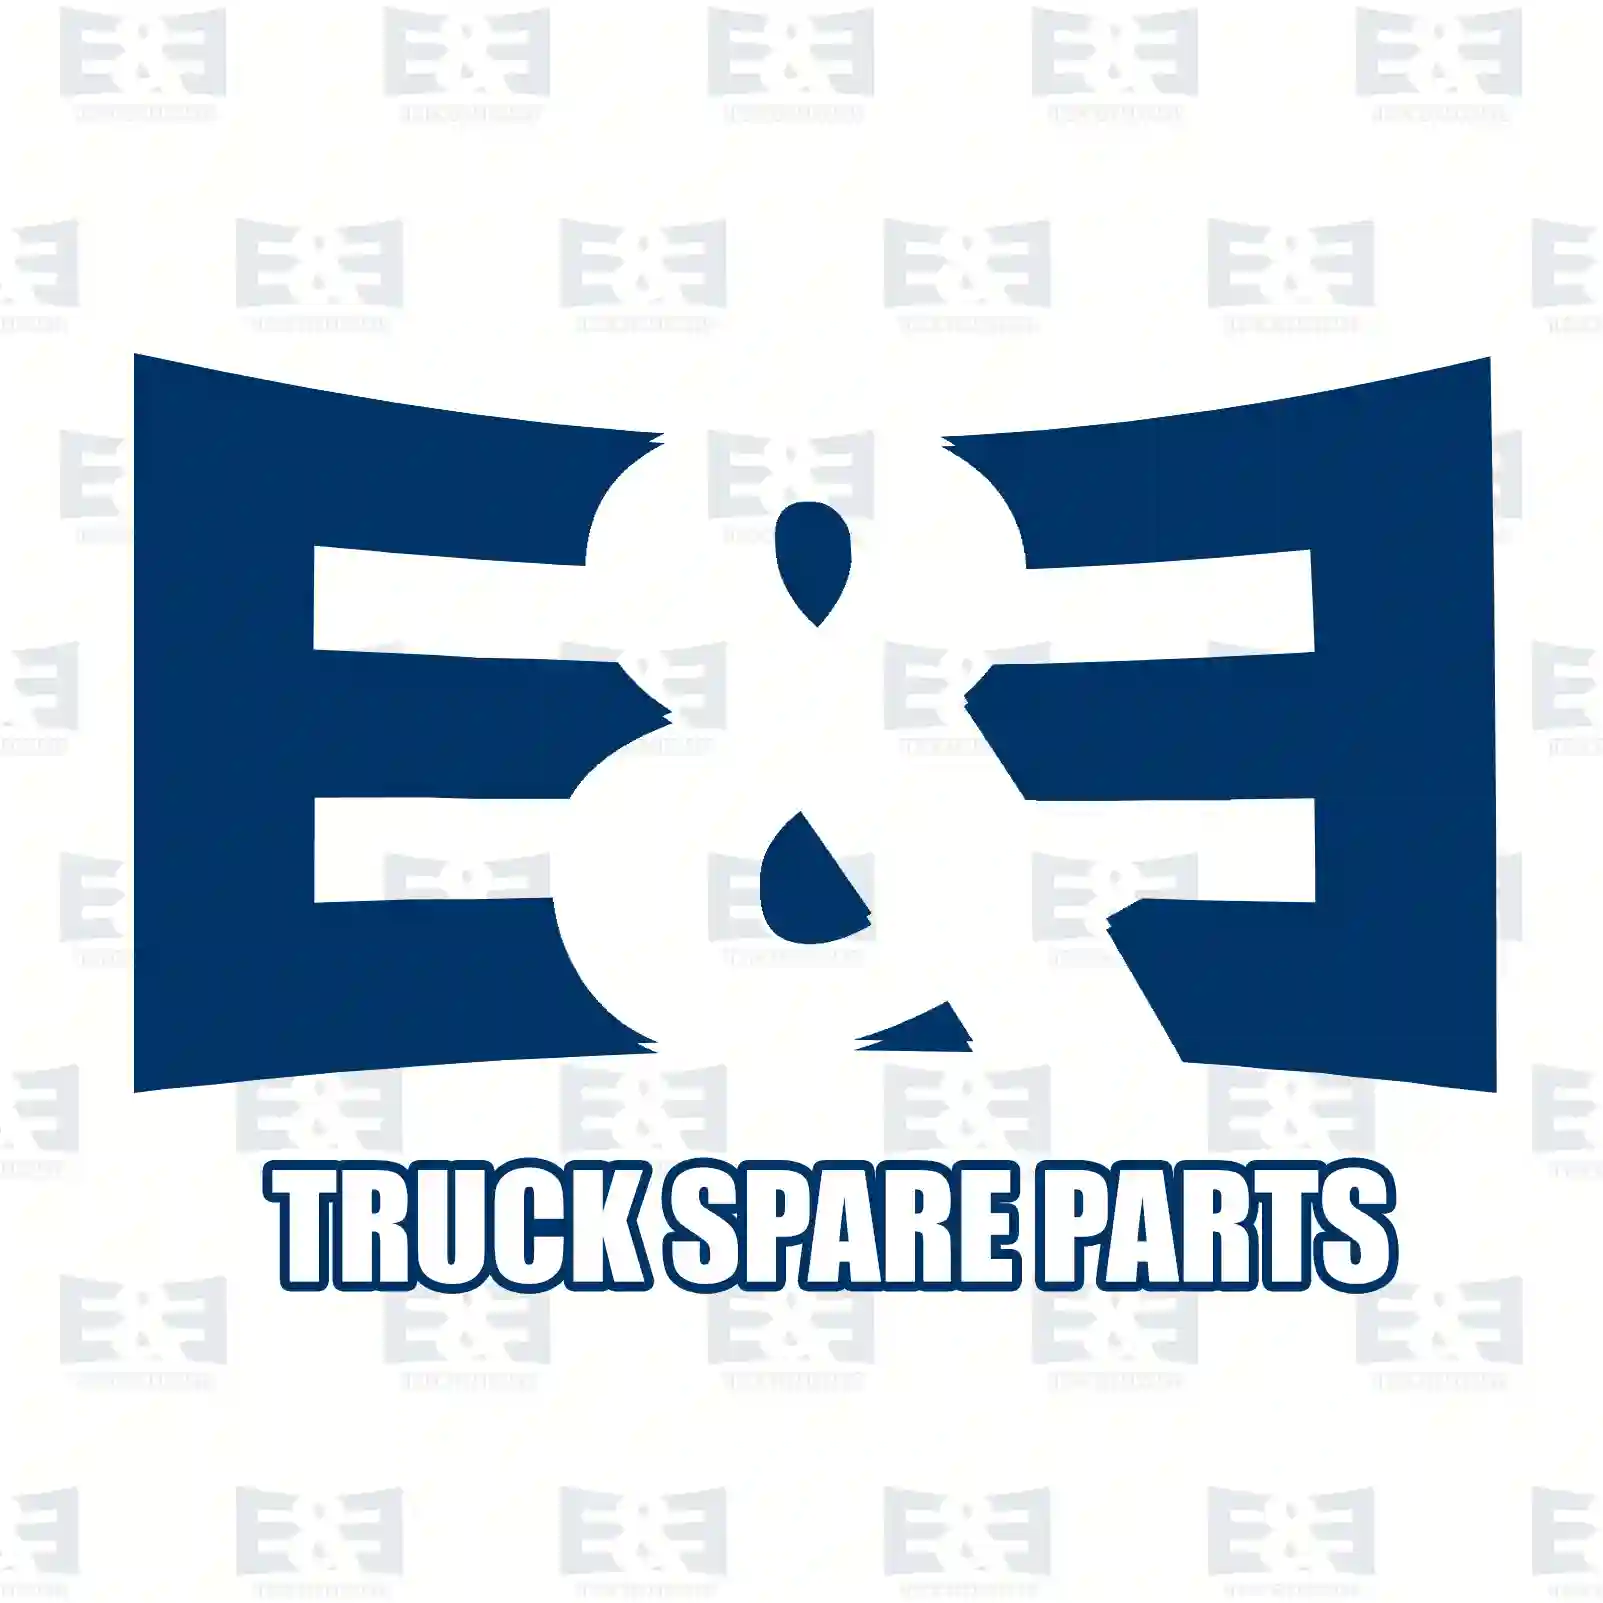  Headlamp, right, without bulbs, with fog lamp || E&E Truck Spare Parts | Truck Spare Parts, Auotomotive Spare Parts